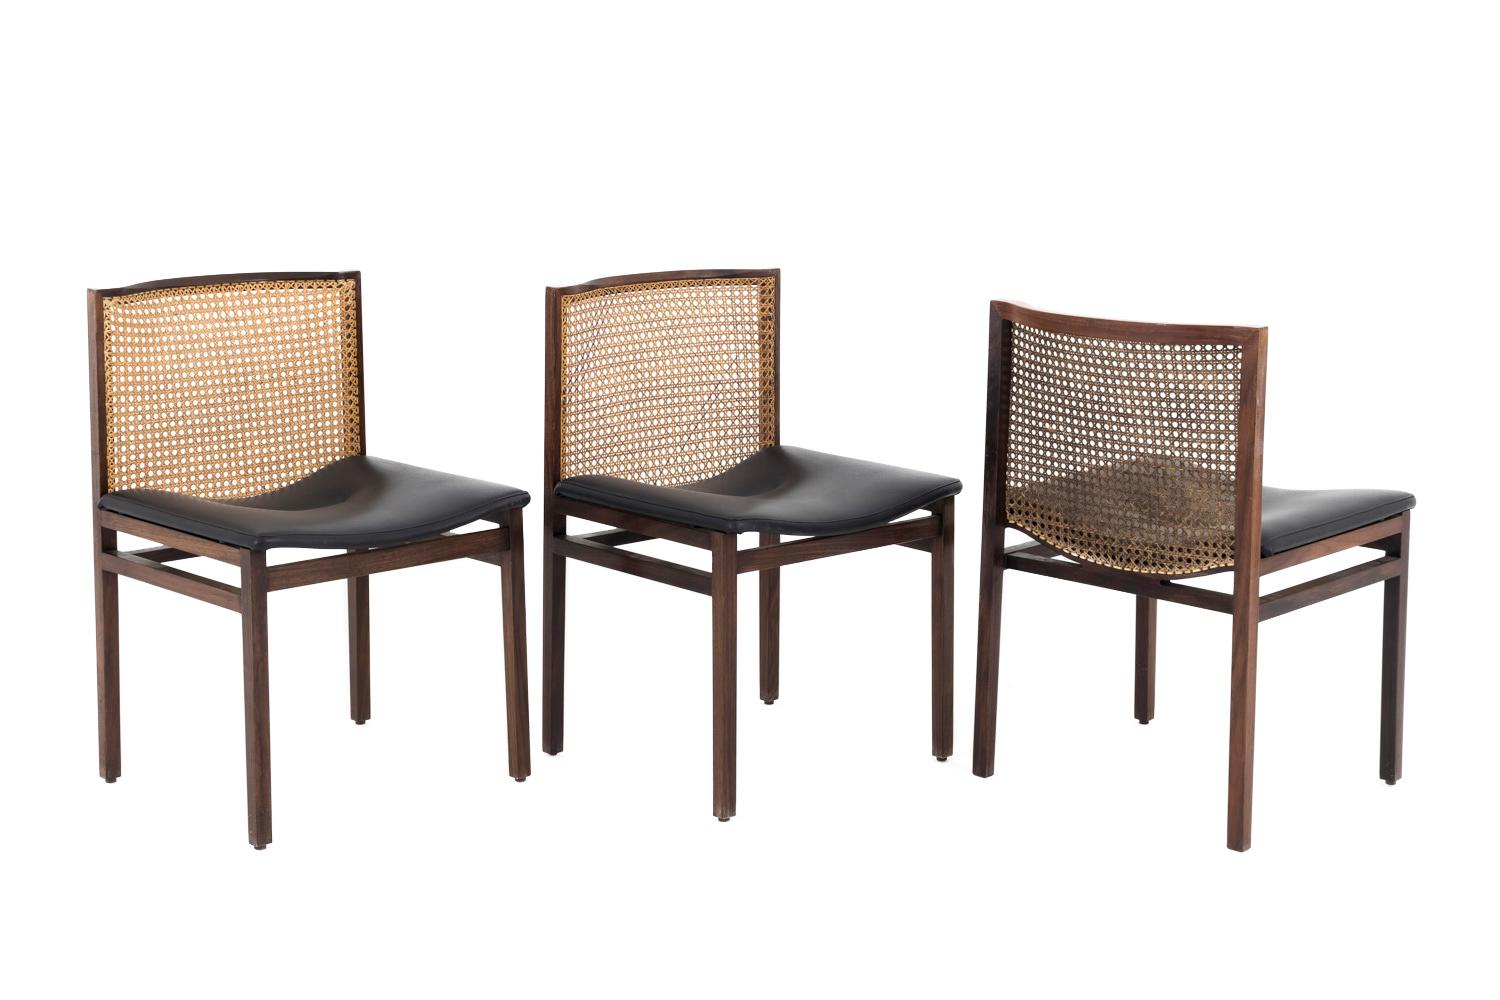 Alfred Hendrickx, attributed to. 

Set of six rosewood chairs standing on four square shaped legs, linked each other by four stretchers. Cane and slightly curved backrest. Curved black leatherette seat with central sewing forming a slight hollow.